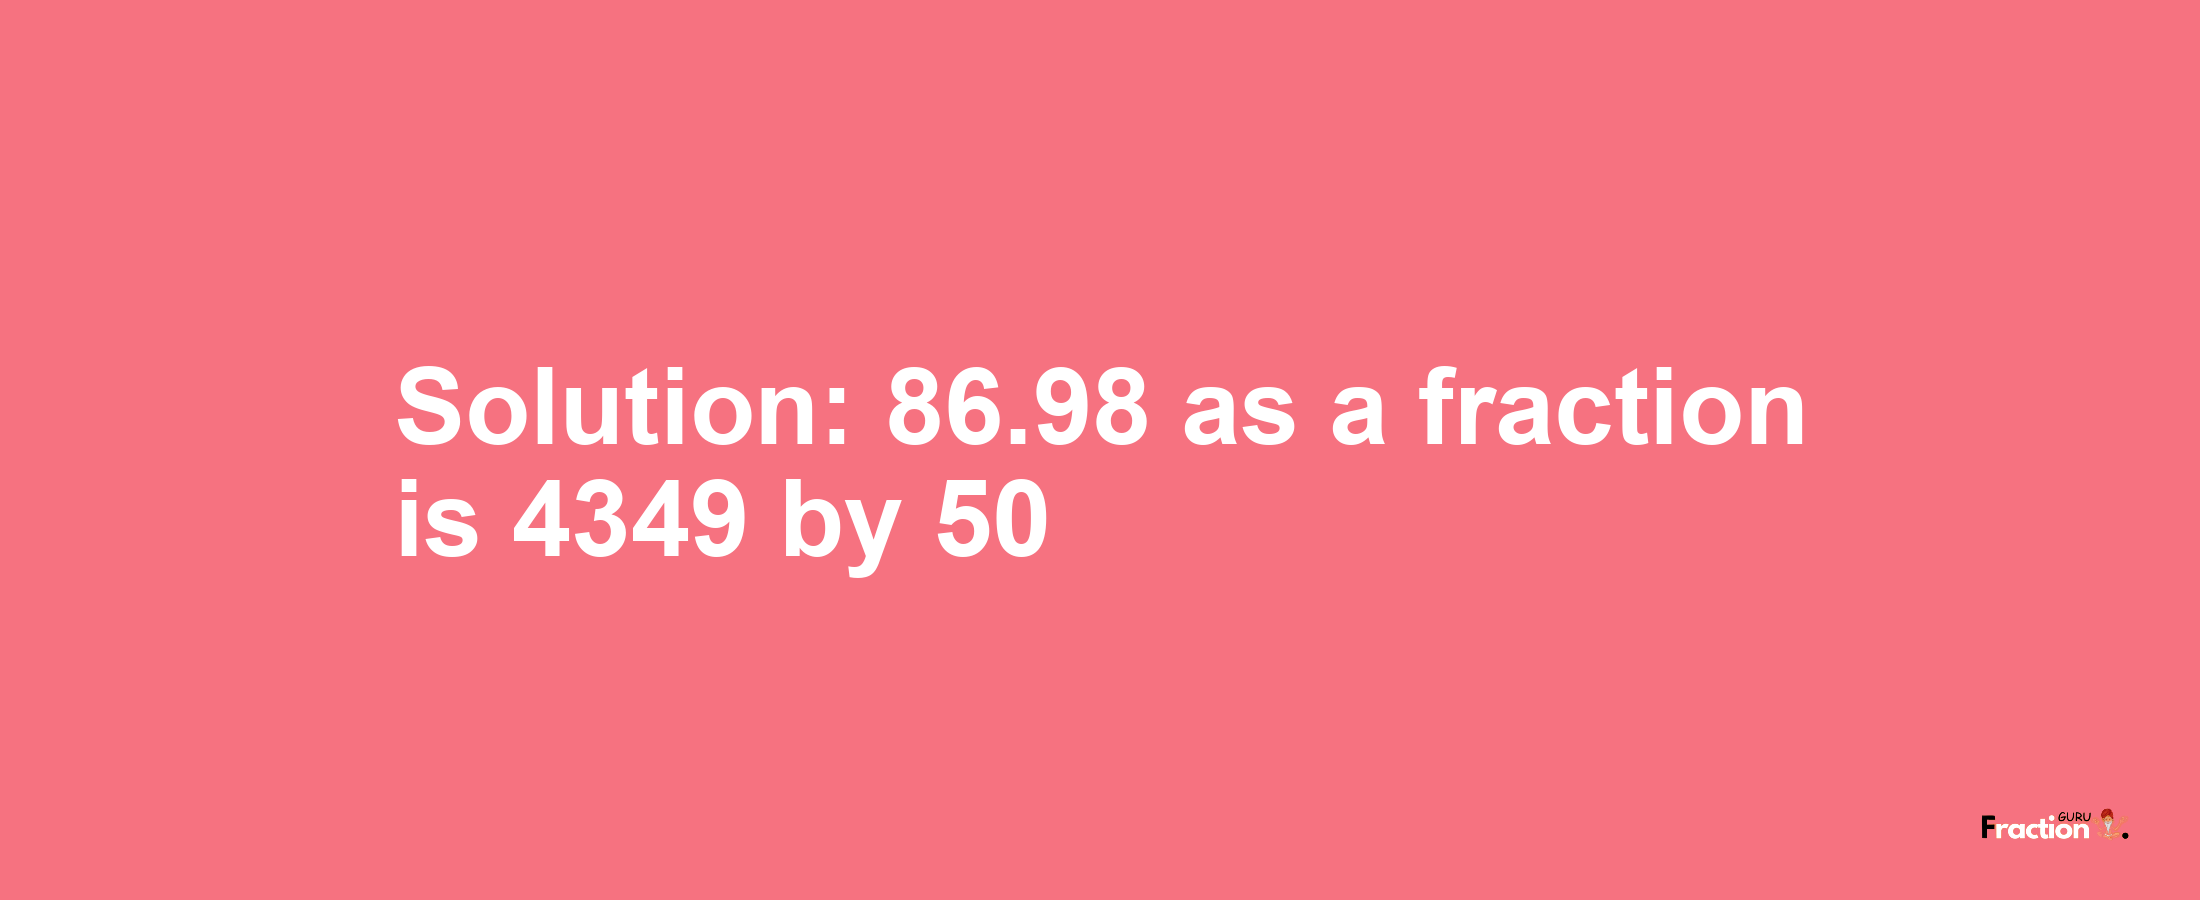 Solution:86.98 as a fraction is 4349/50